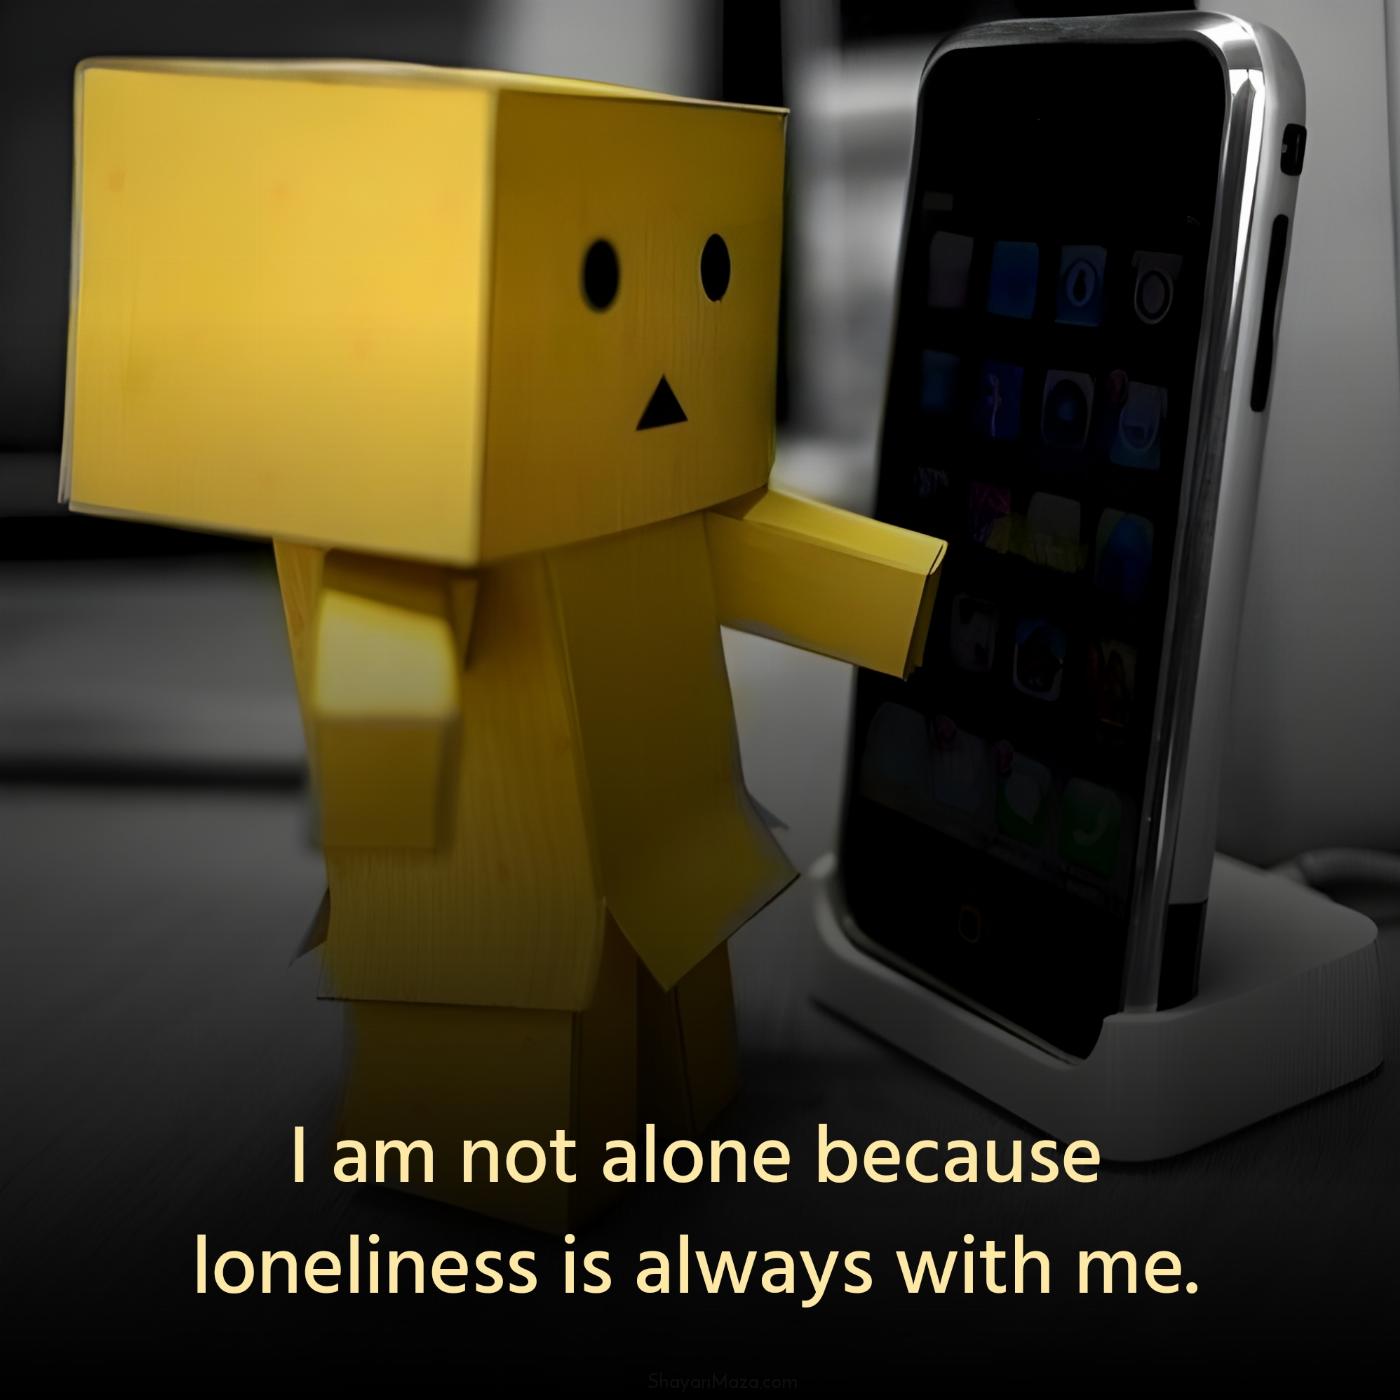 I am not alone because loneliness is always with me